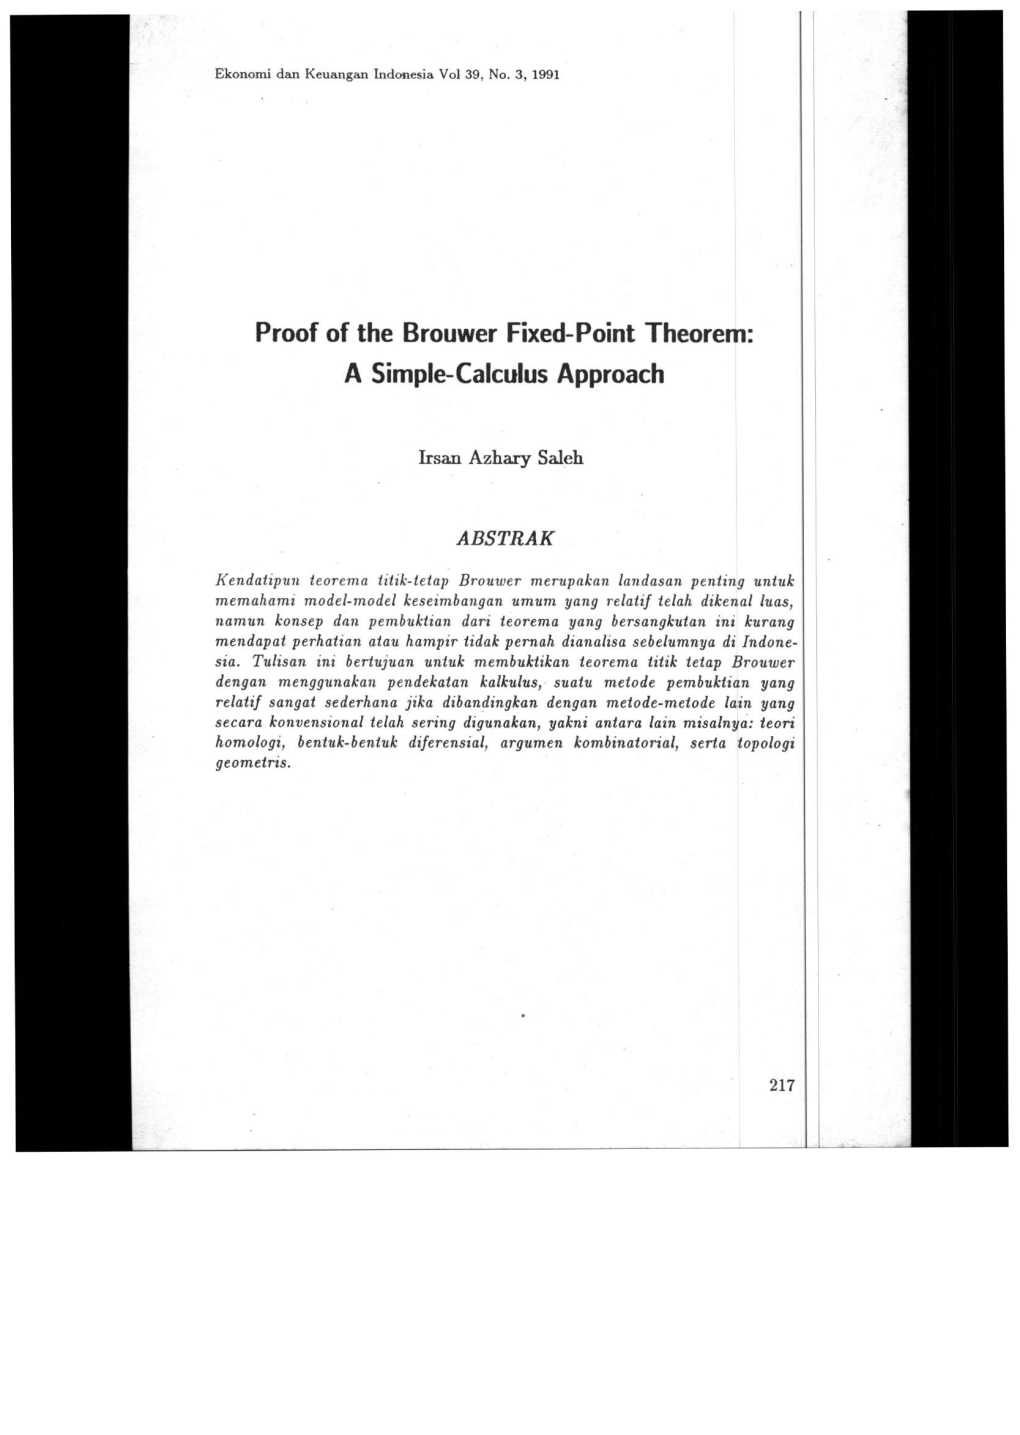 Proof of the Brouwer Fixed-Point Theorem: a Simple-Calculus Approach